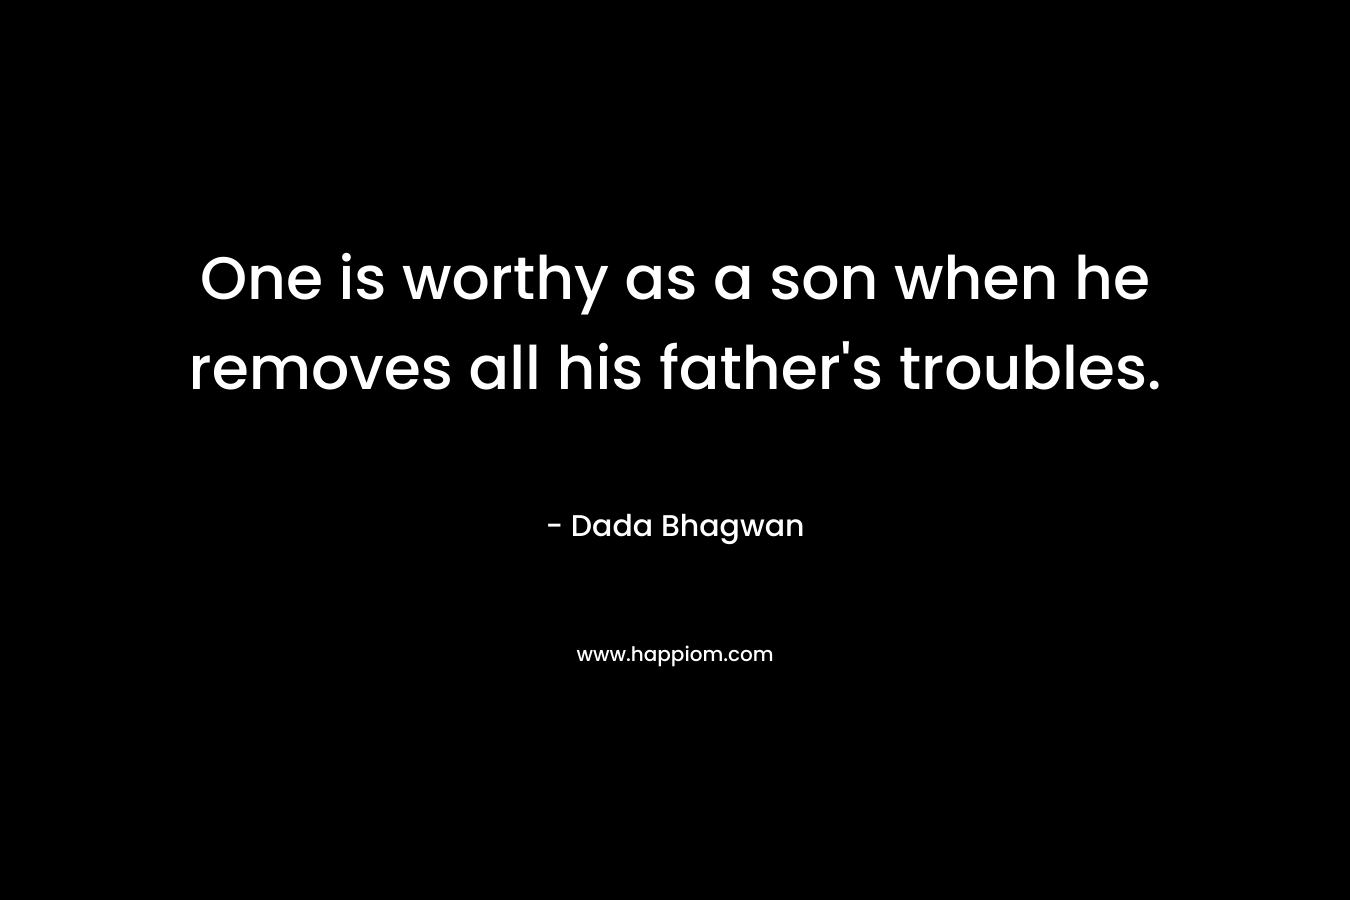 One is worthy as a son when he removes all his father’s troubles. – Dada Bhagwan